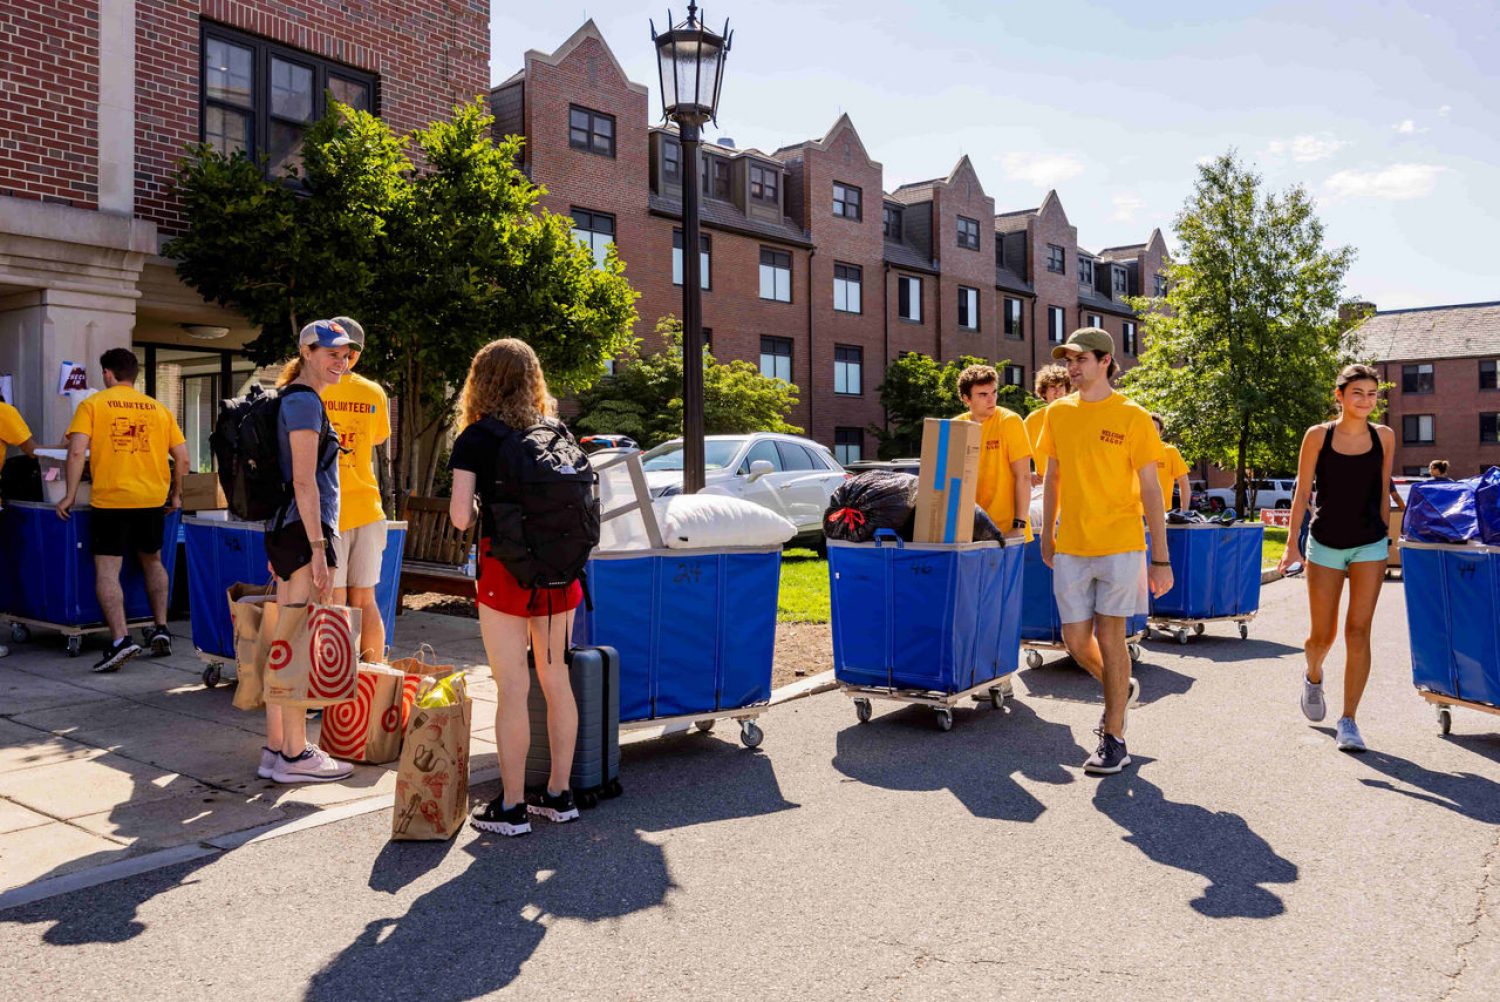 Welcome Wagon Members Assisting with Upper Campus Move-In